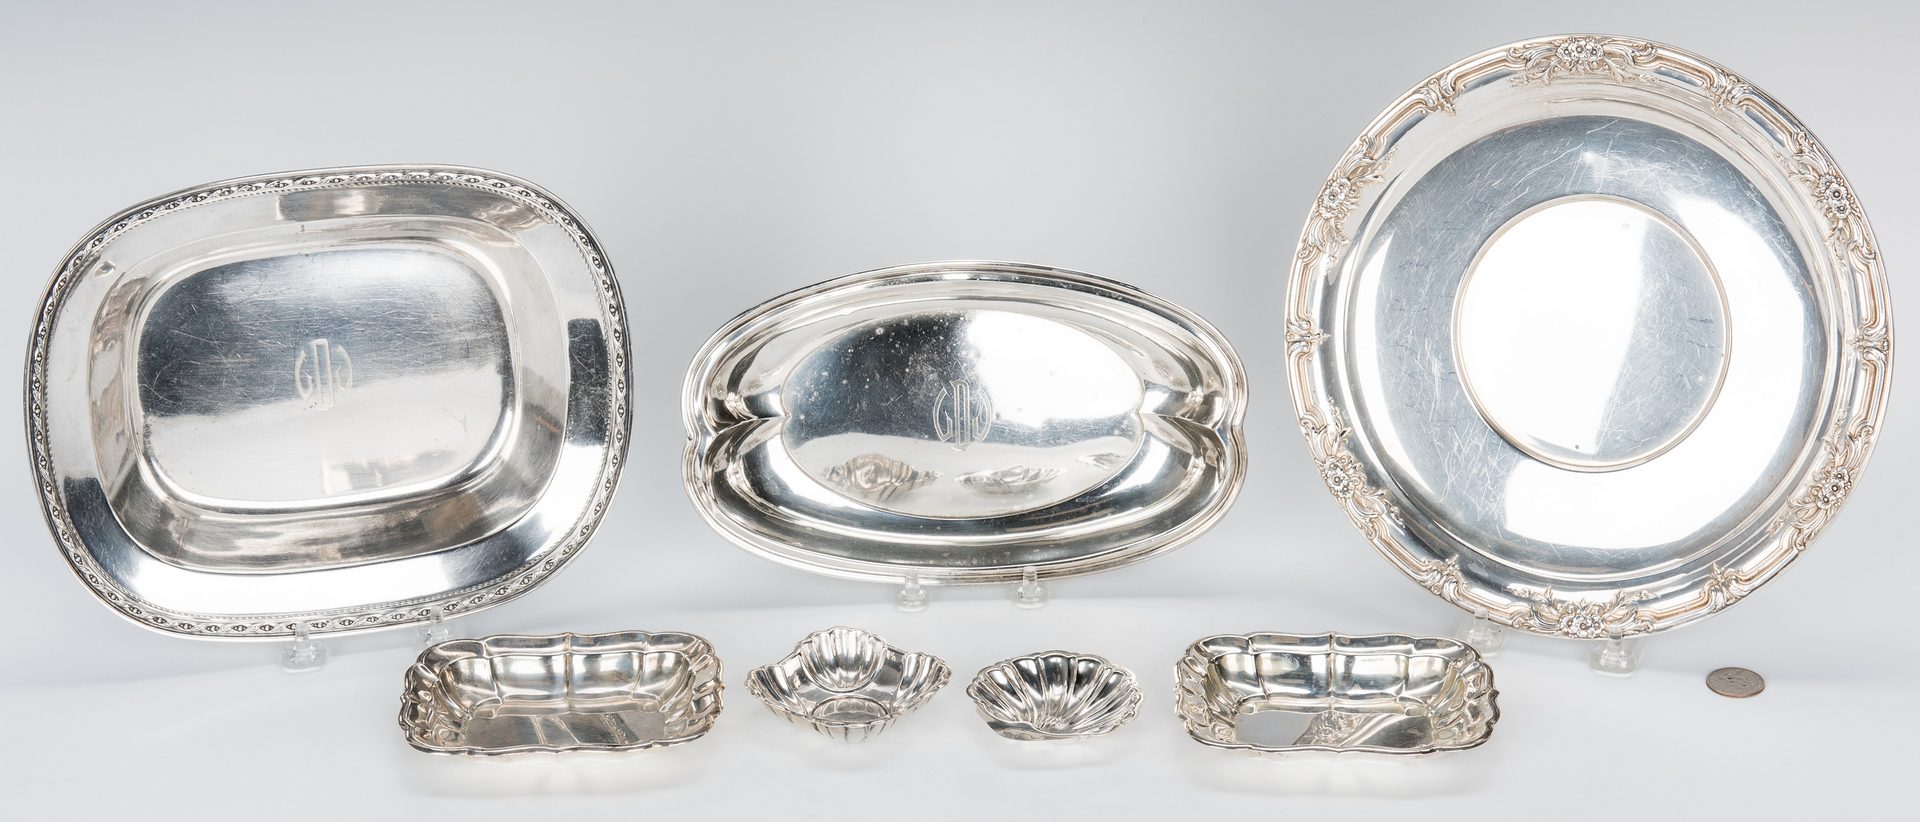 Lot 762: 7 Sterling Silver Holloware Serving Items